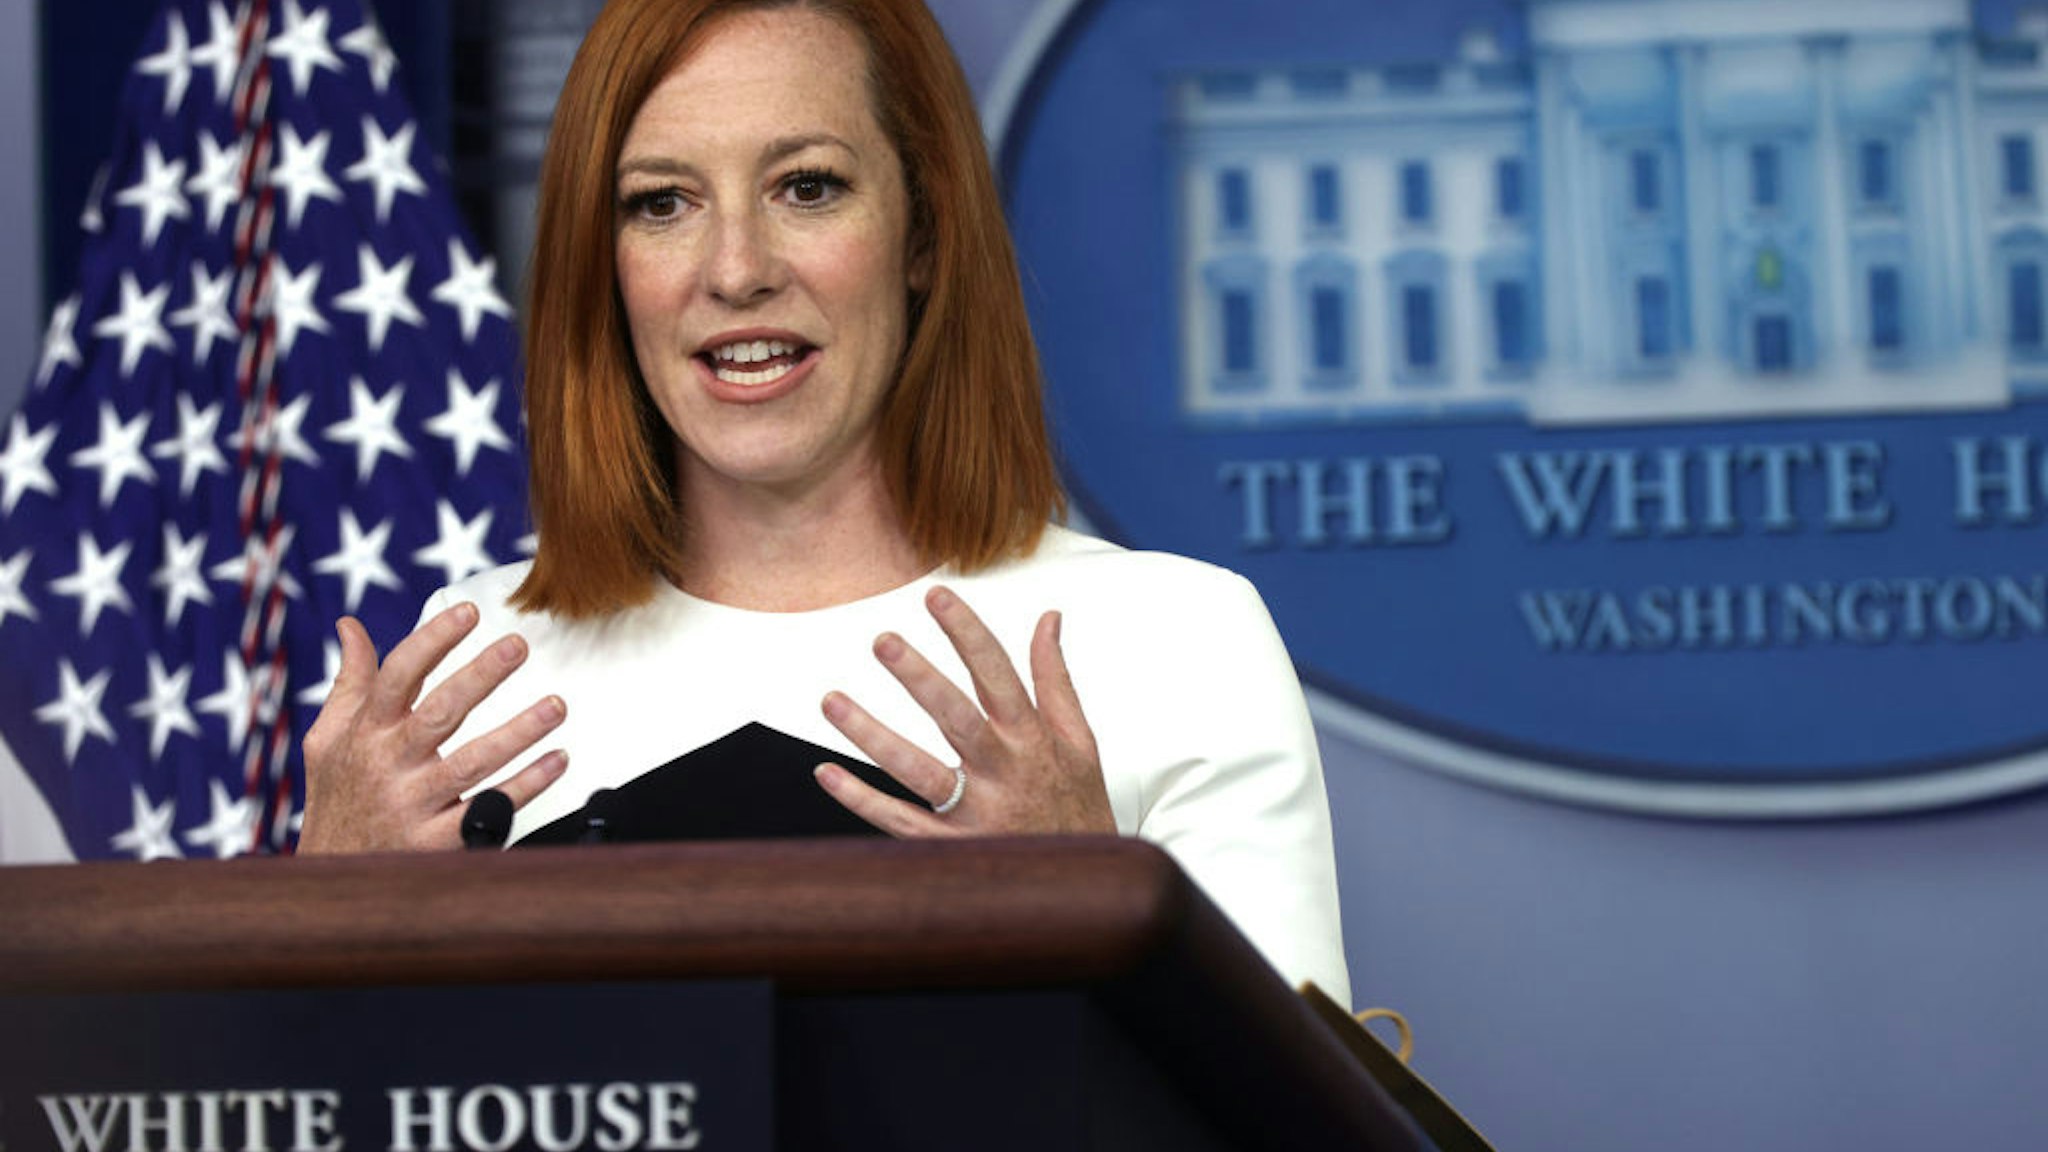 WASHINGTON, DC - MAY 05: White House Press Secretary Jen Psaki speaks during a daily press briefing at the James Brady Press Briefing Room of the White House May 5, 2021 in Washington, DC. President Joe Biden will deliver remarks on his administration’s implementation of the American Rescue Plan later today. (Photo by Alex Wong/Getty Images)